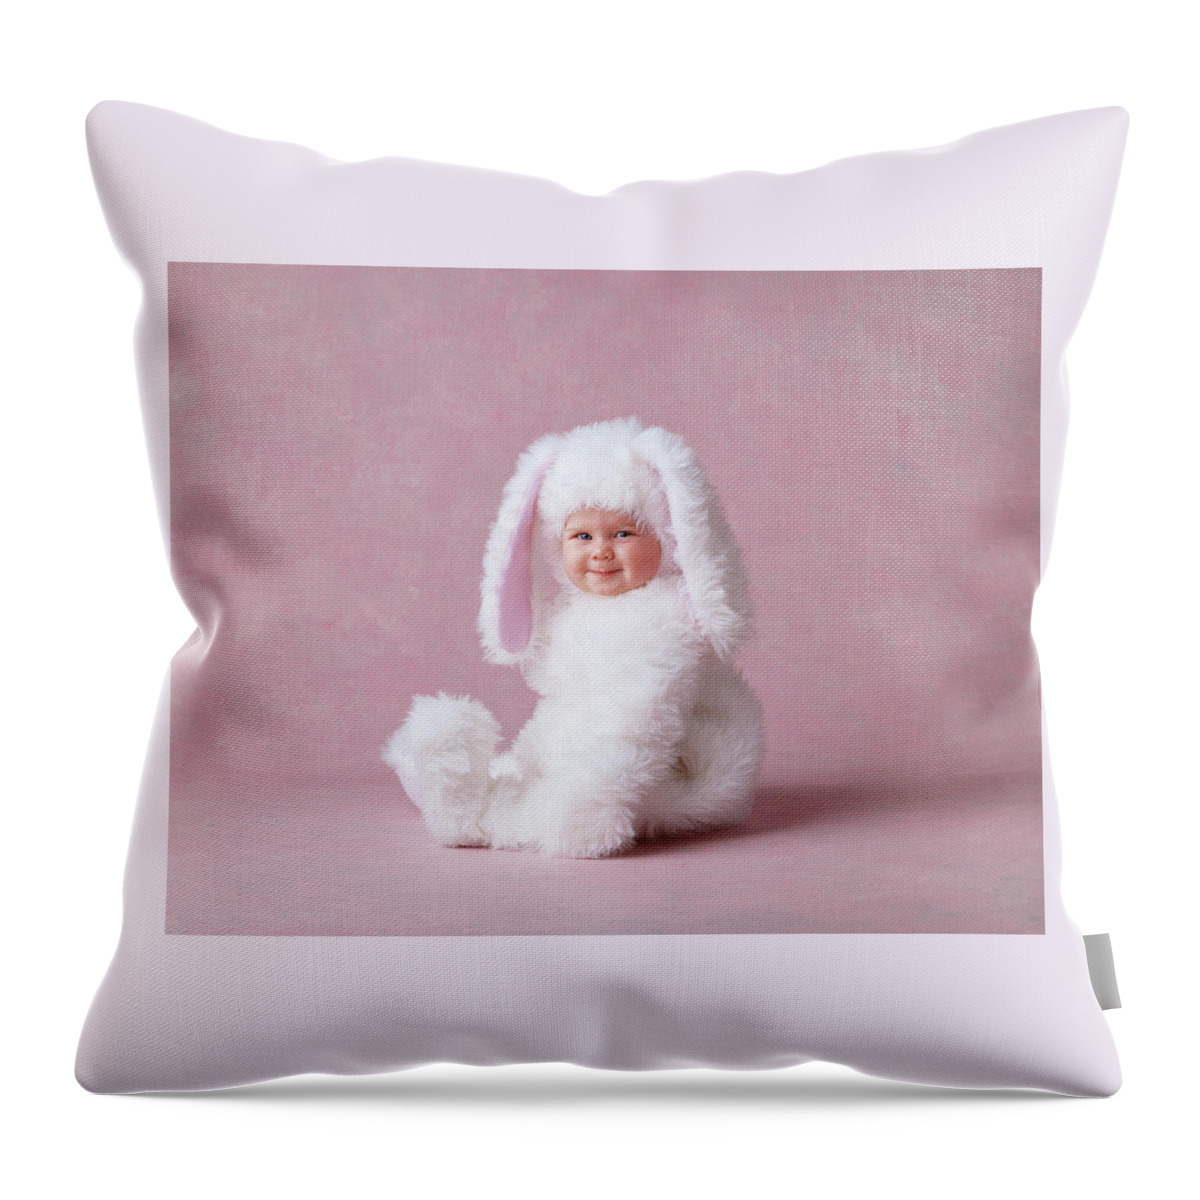 Bunnies Throw Pillow featuring the photograph Baby Bunny #3 by Anne Geddes